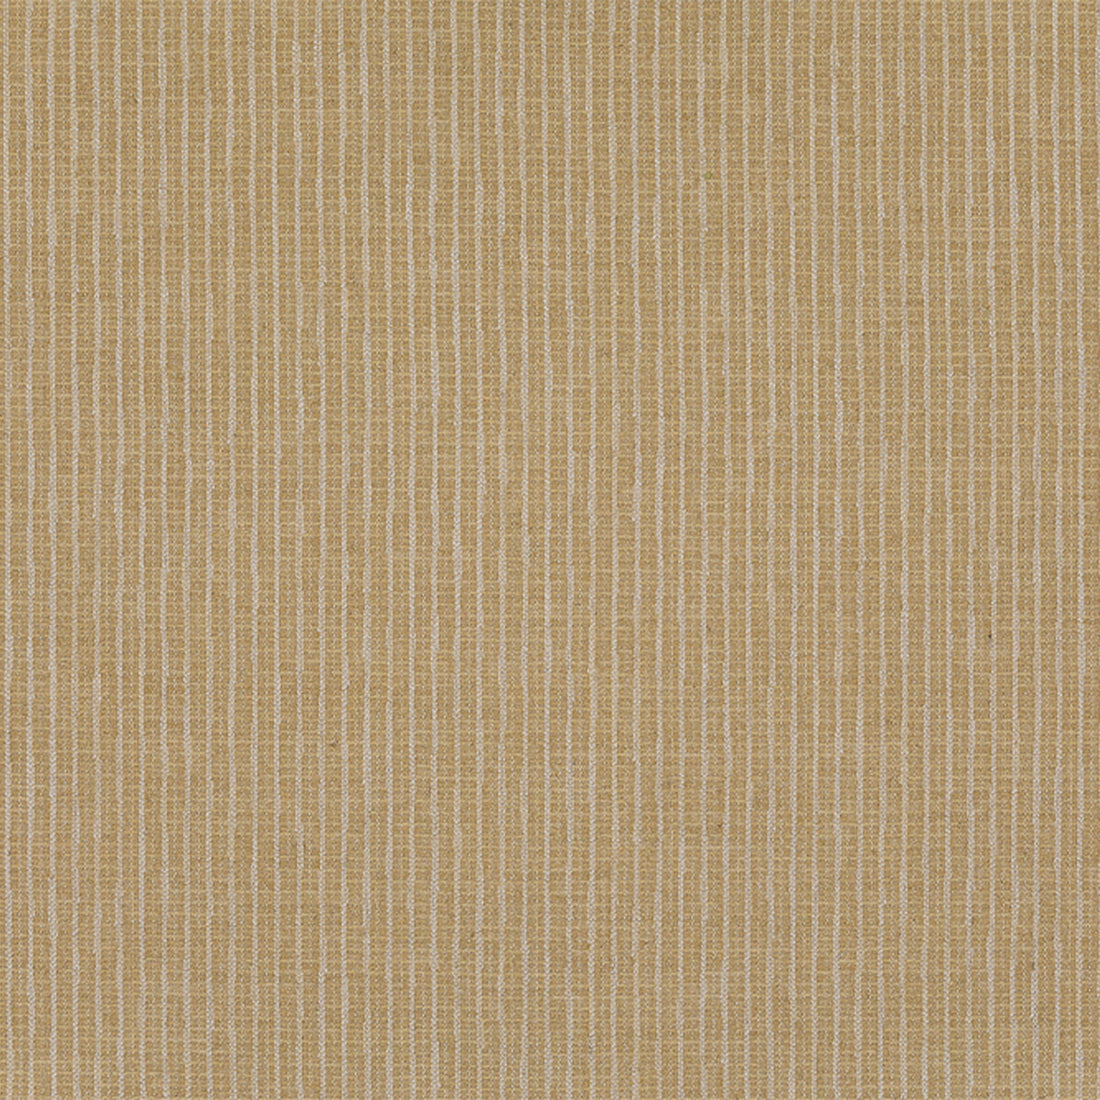 Bailey fabric in gold color - pattern BFC-3700.4.0 - by Lee Jofa in the Blithfield collection